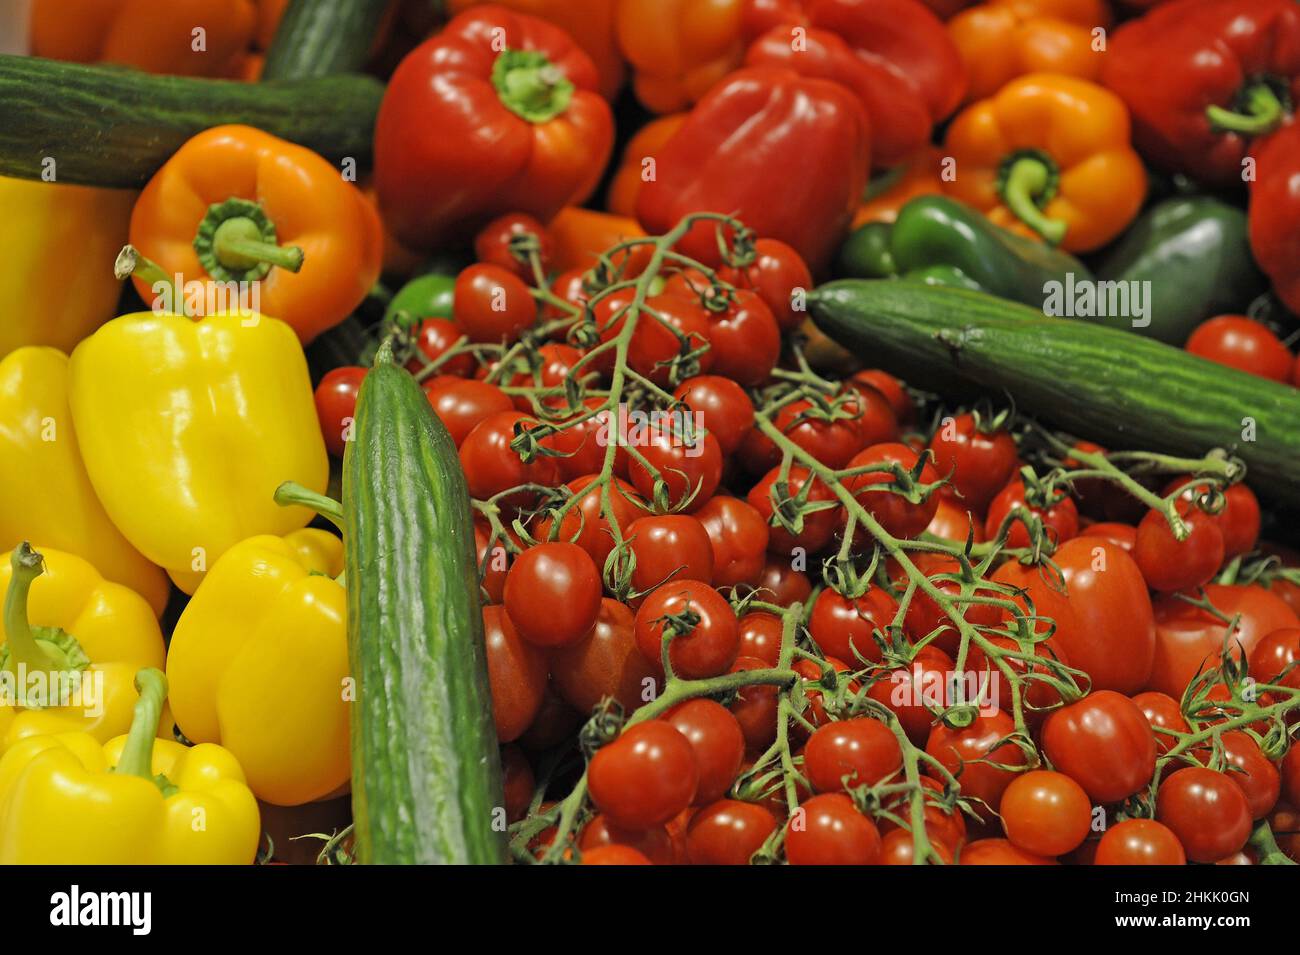 chili pepper, paprika (Capsicum annuum), paprika, tomatoes and cucumber on a market, Germany Stock Photo